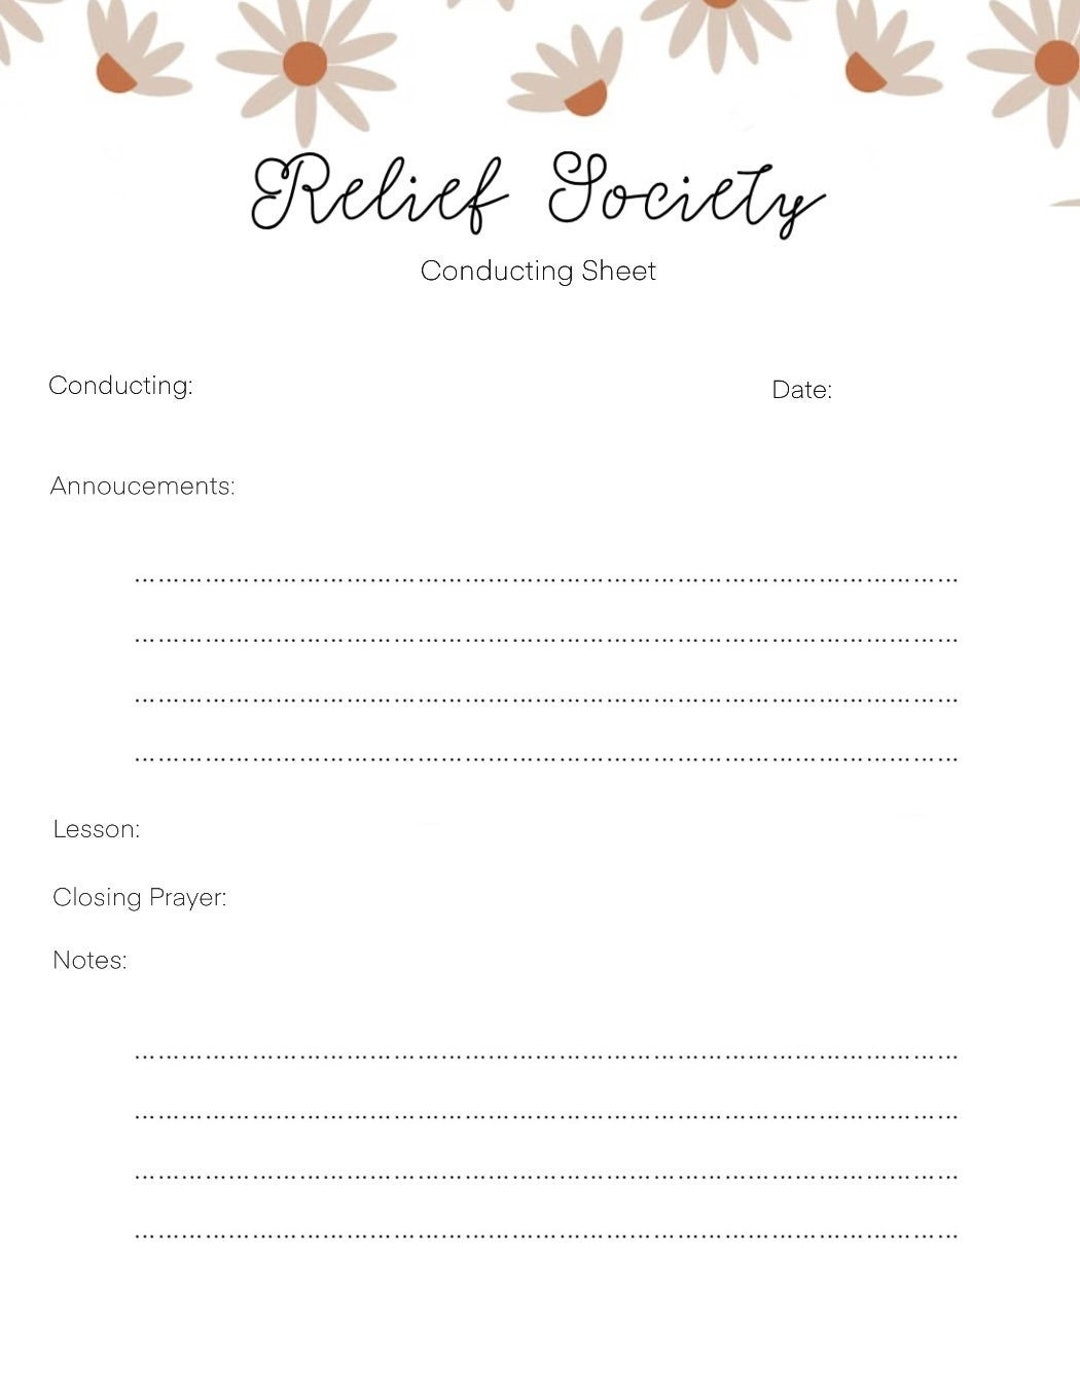 Relief Society Conducting Sheet Etsy